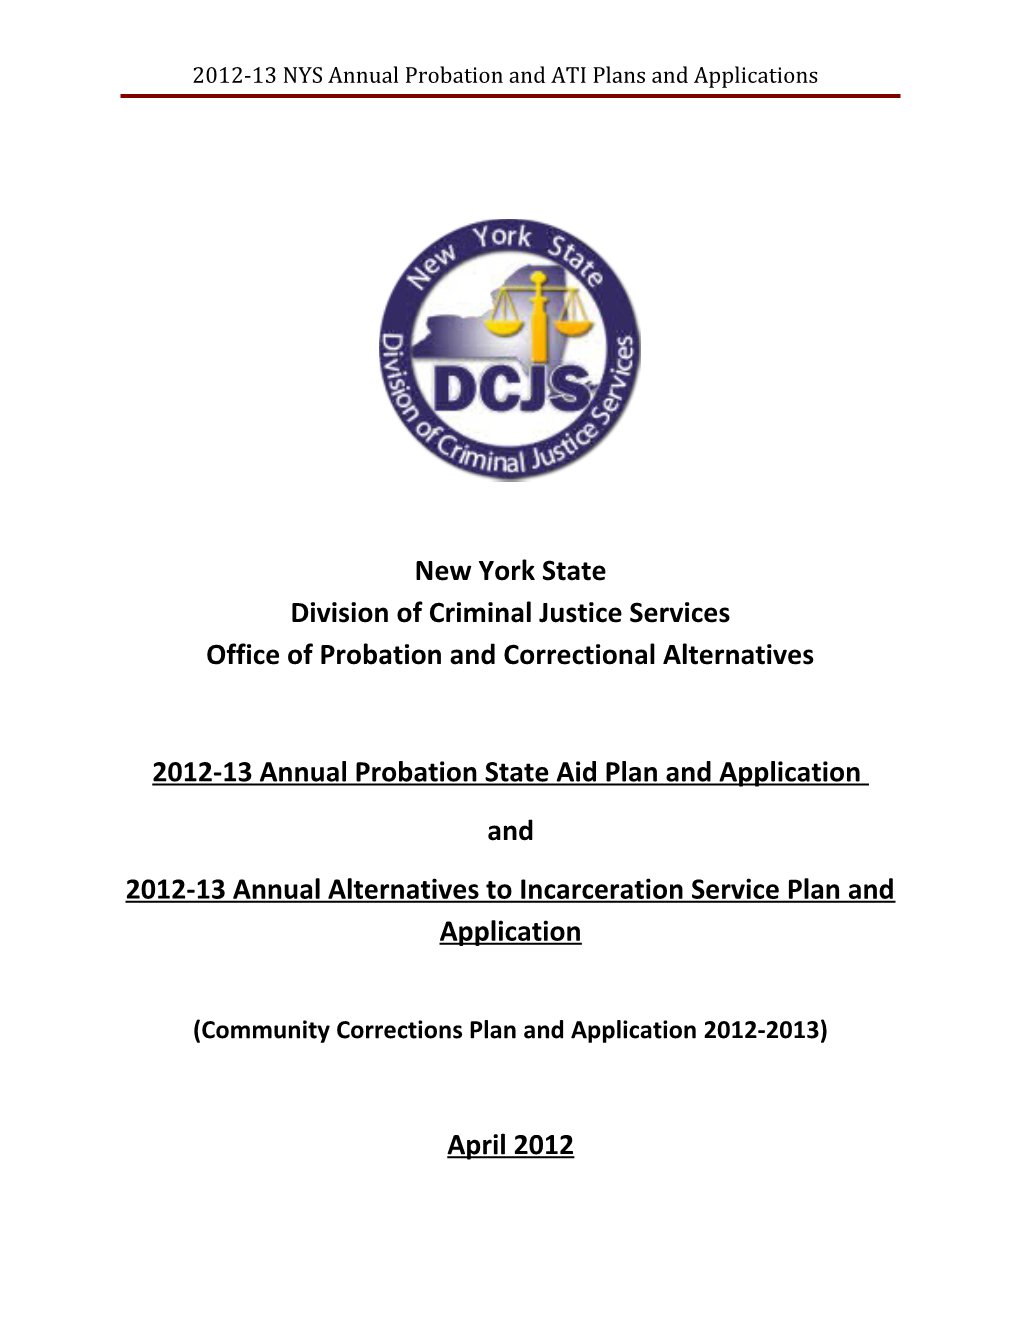 Consolidated Community Corrections Plan and Application 2012-2013